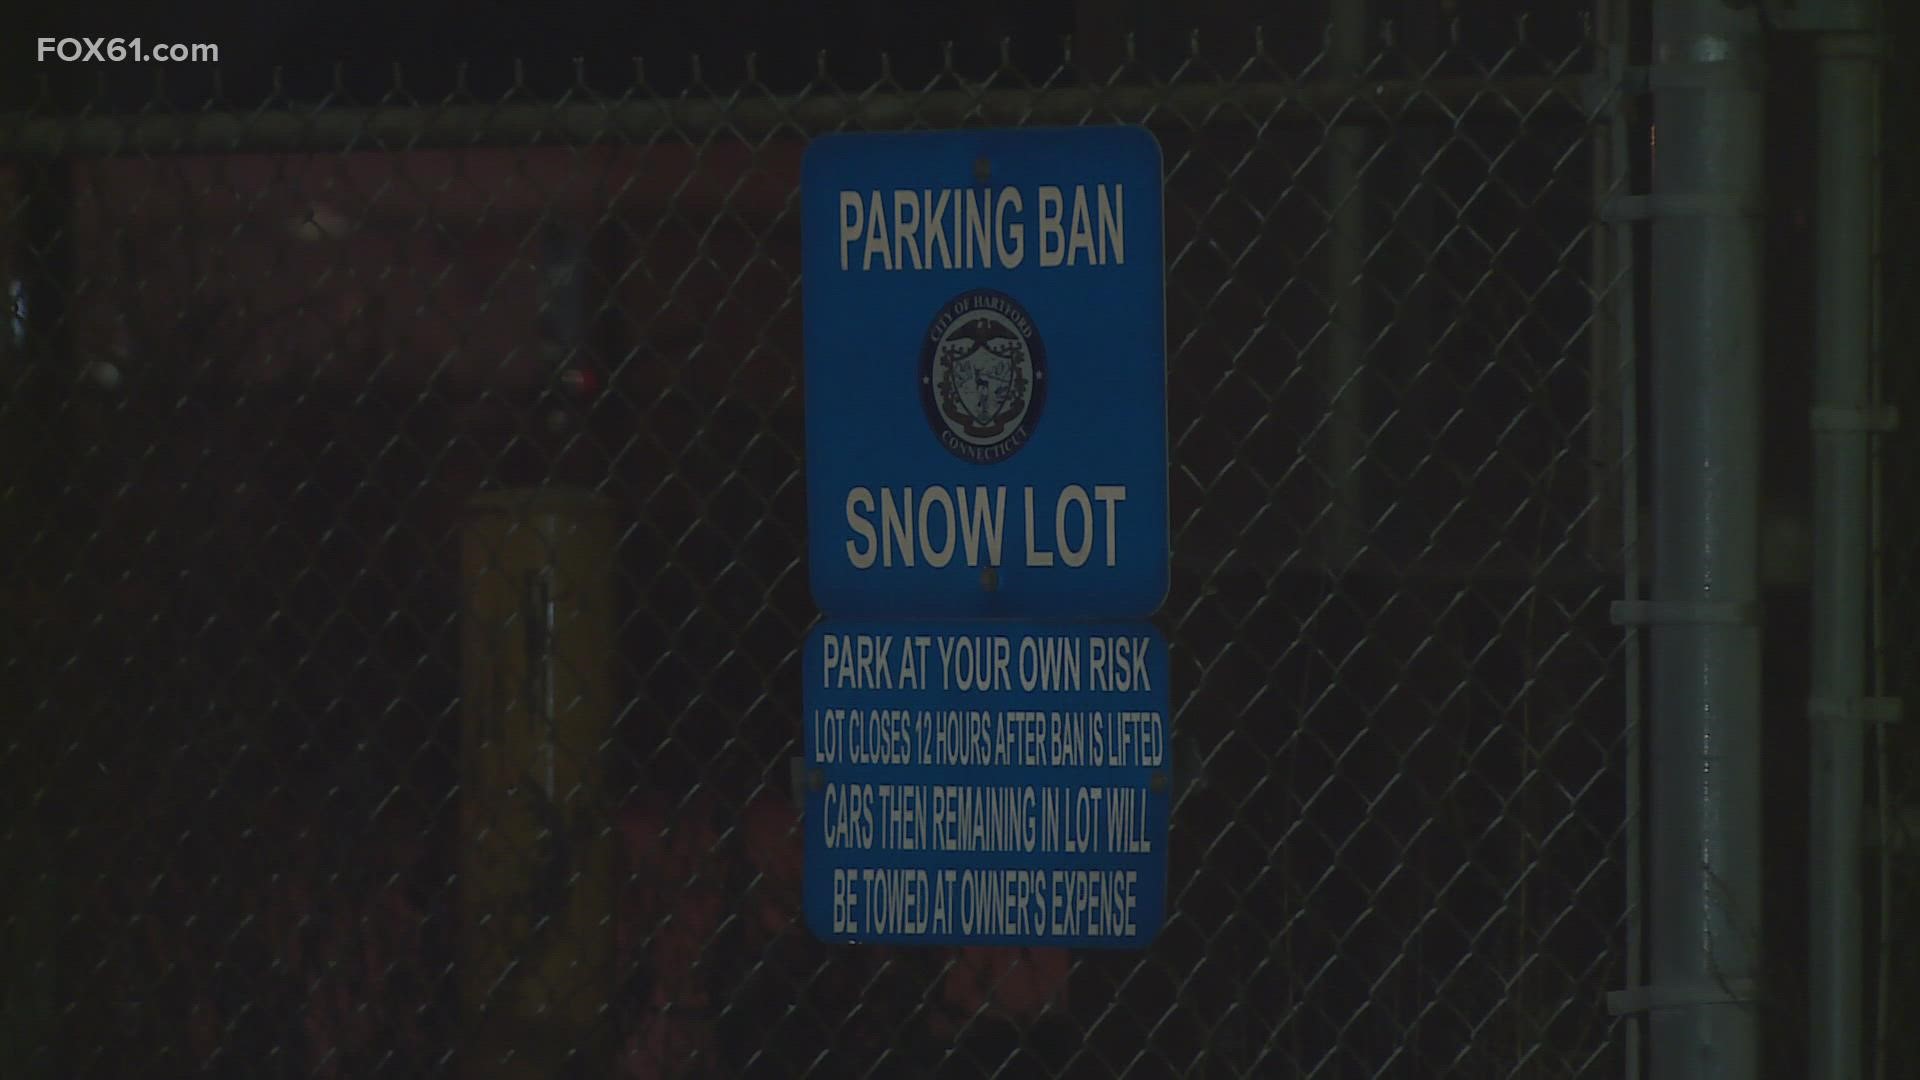 Many towns and cities will have parking bans that begin at midnight on Friday